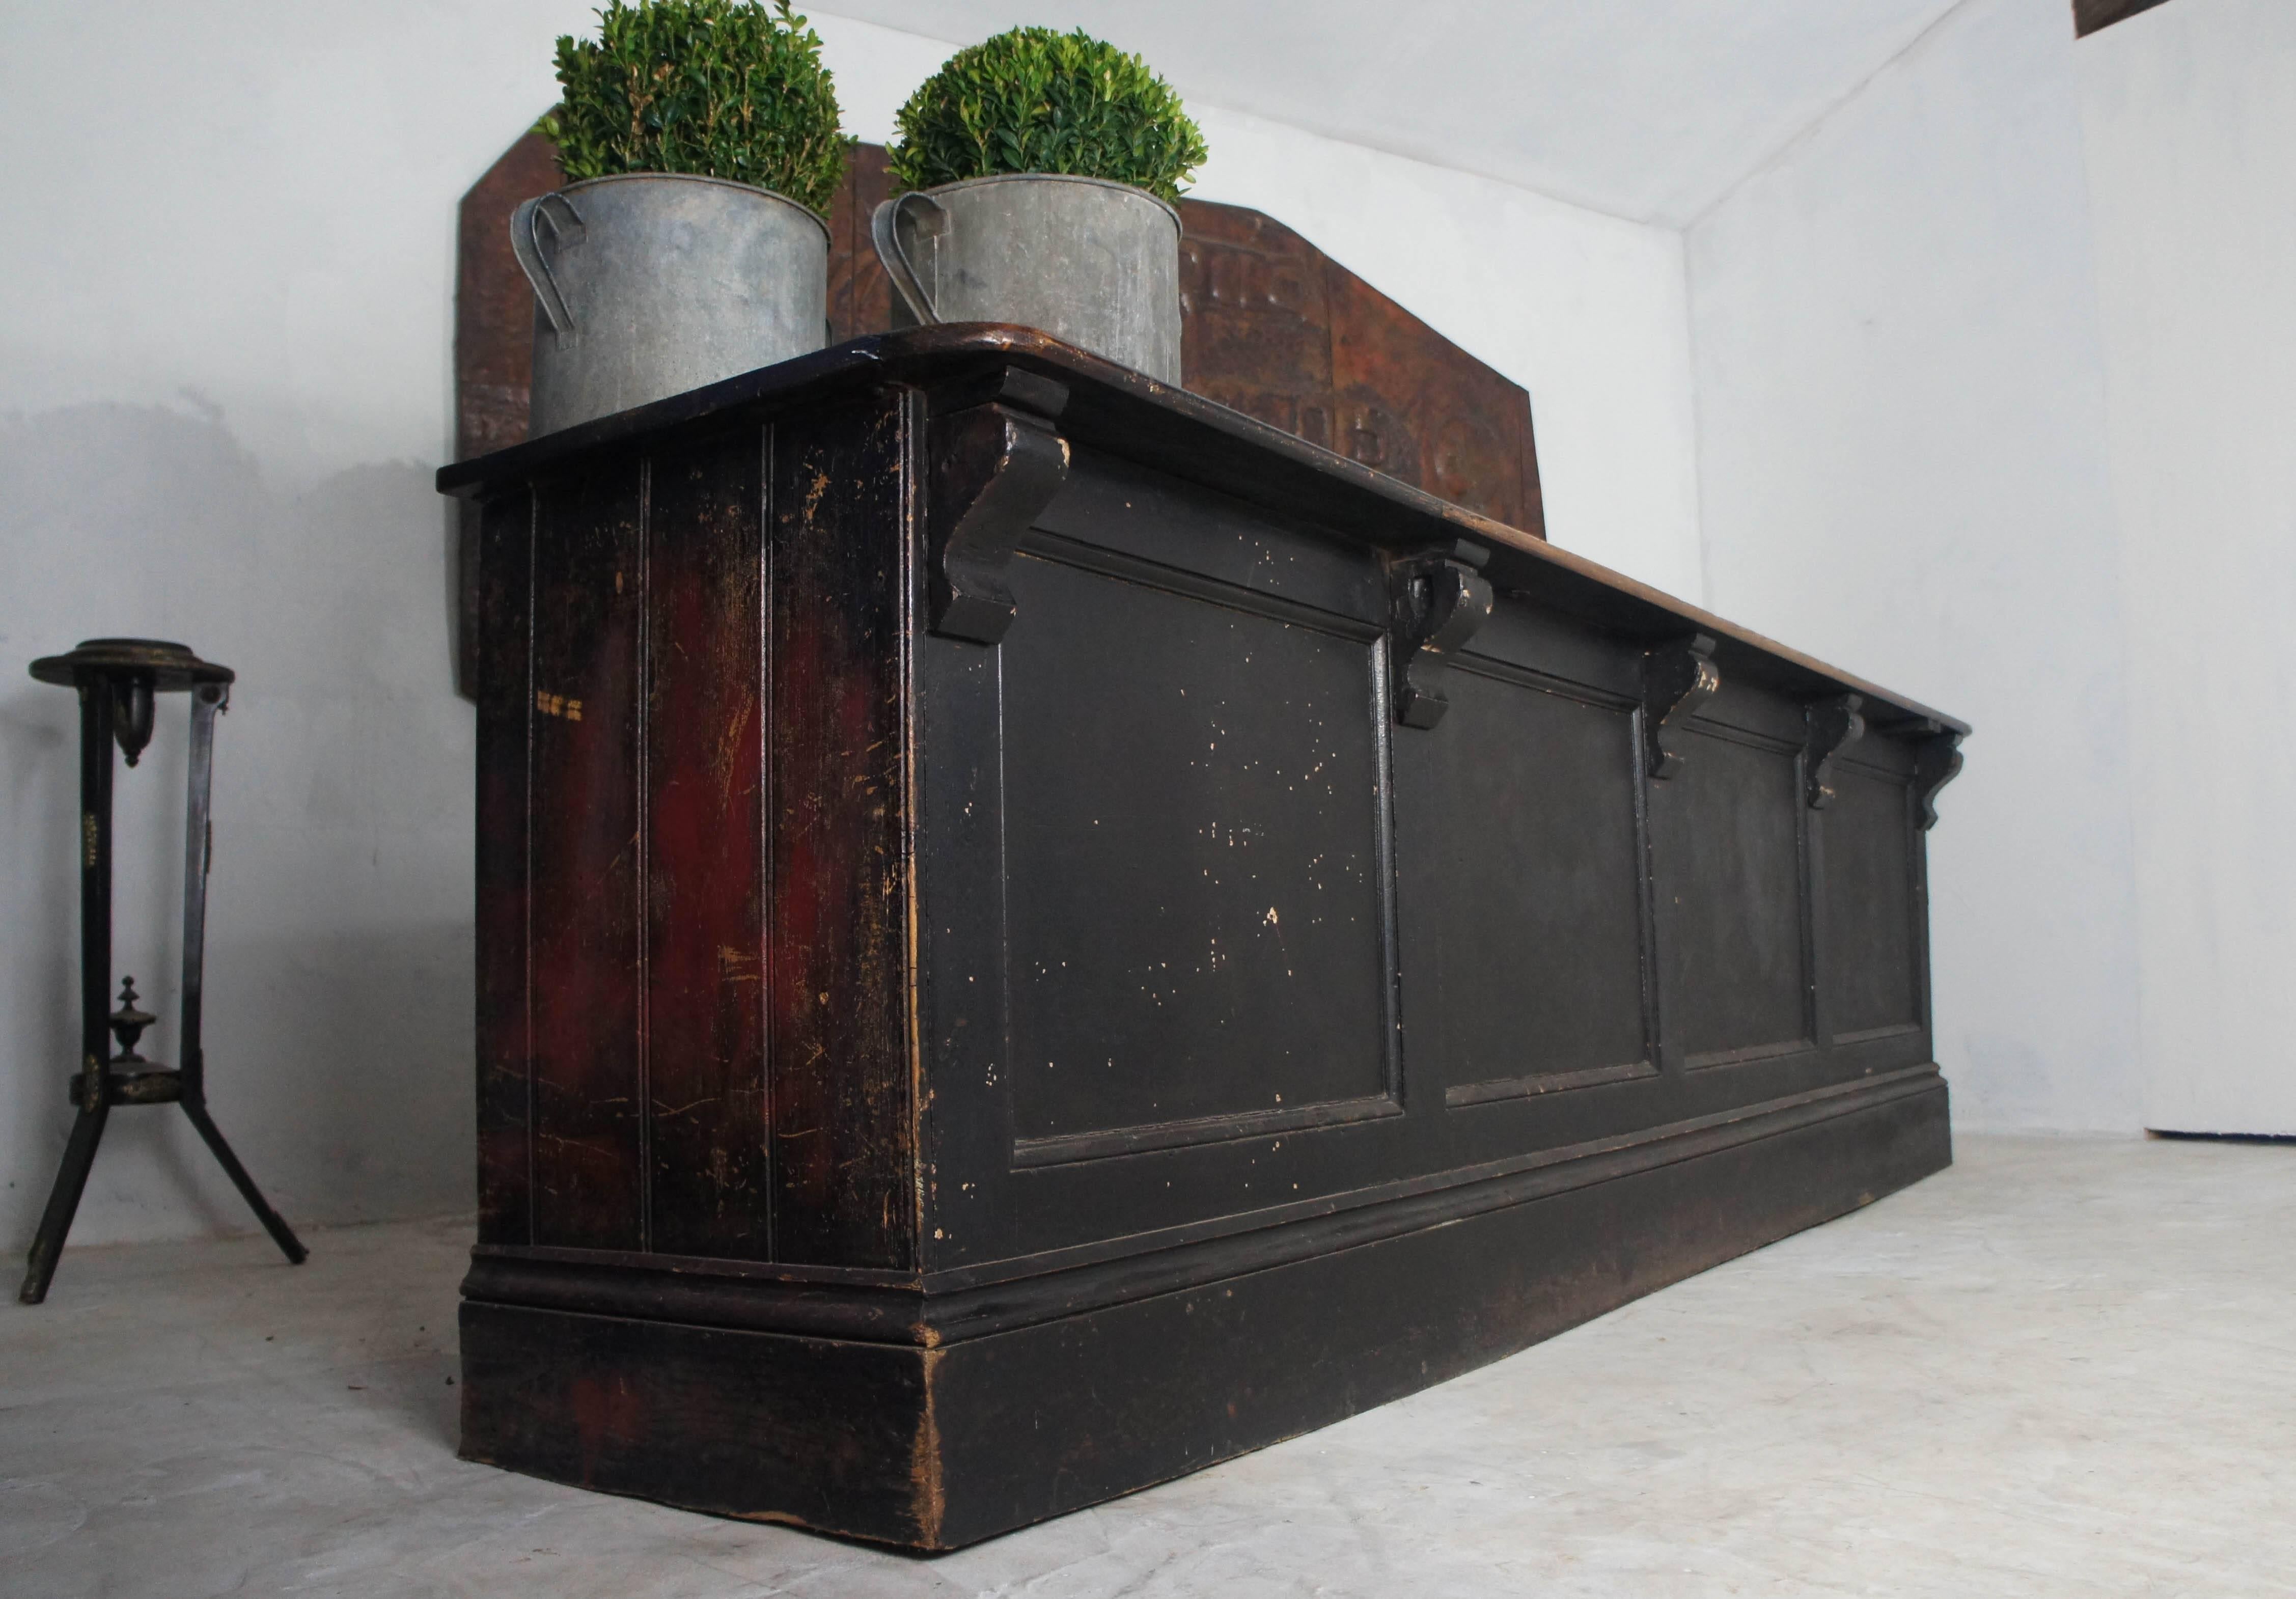 We were very lucky to find a pair of these Victorian pine shop counters. One sold previously and this one has just returned from a photo shoot in Ireland.
It is very hard to find such incredible and original shop counters in this condition, as they